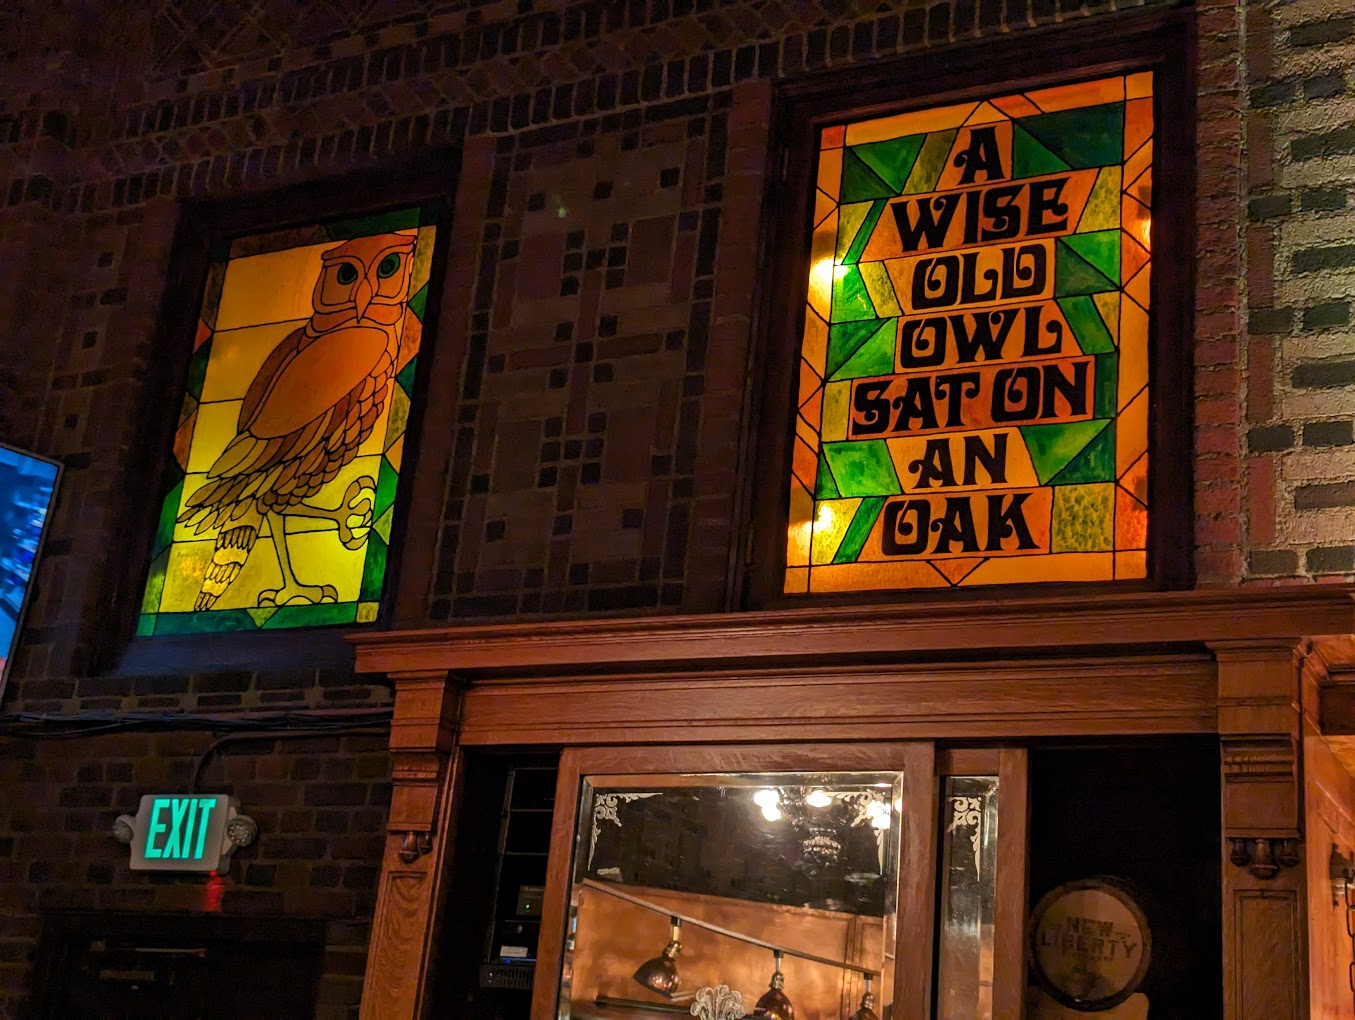 Owl stained glass windows above bar